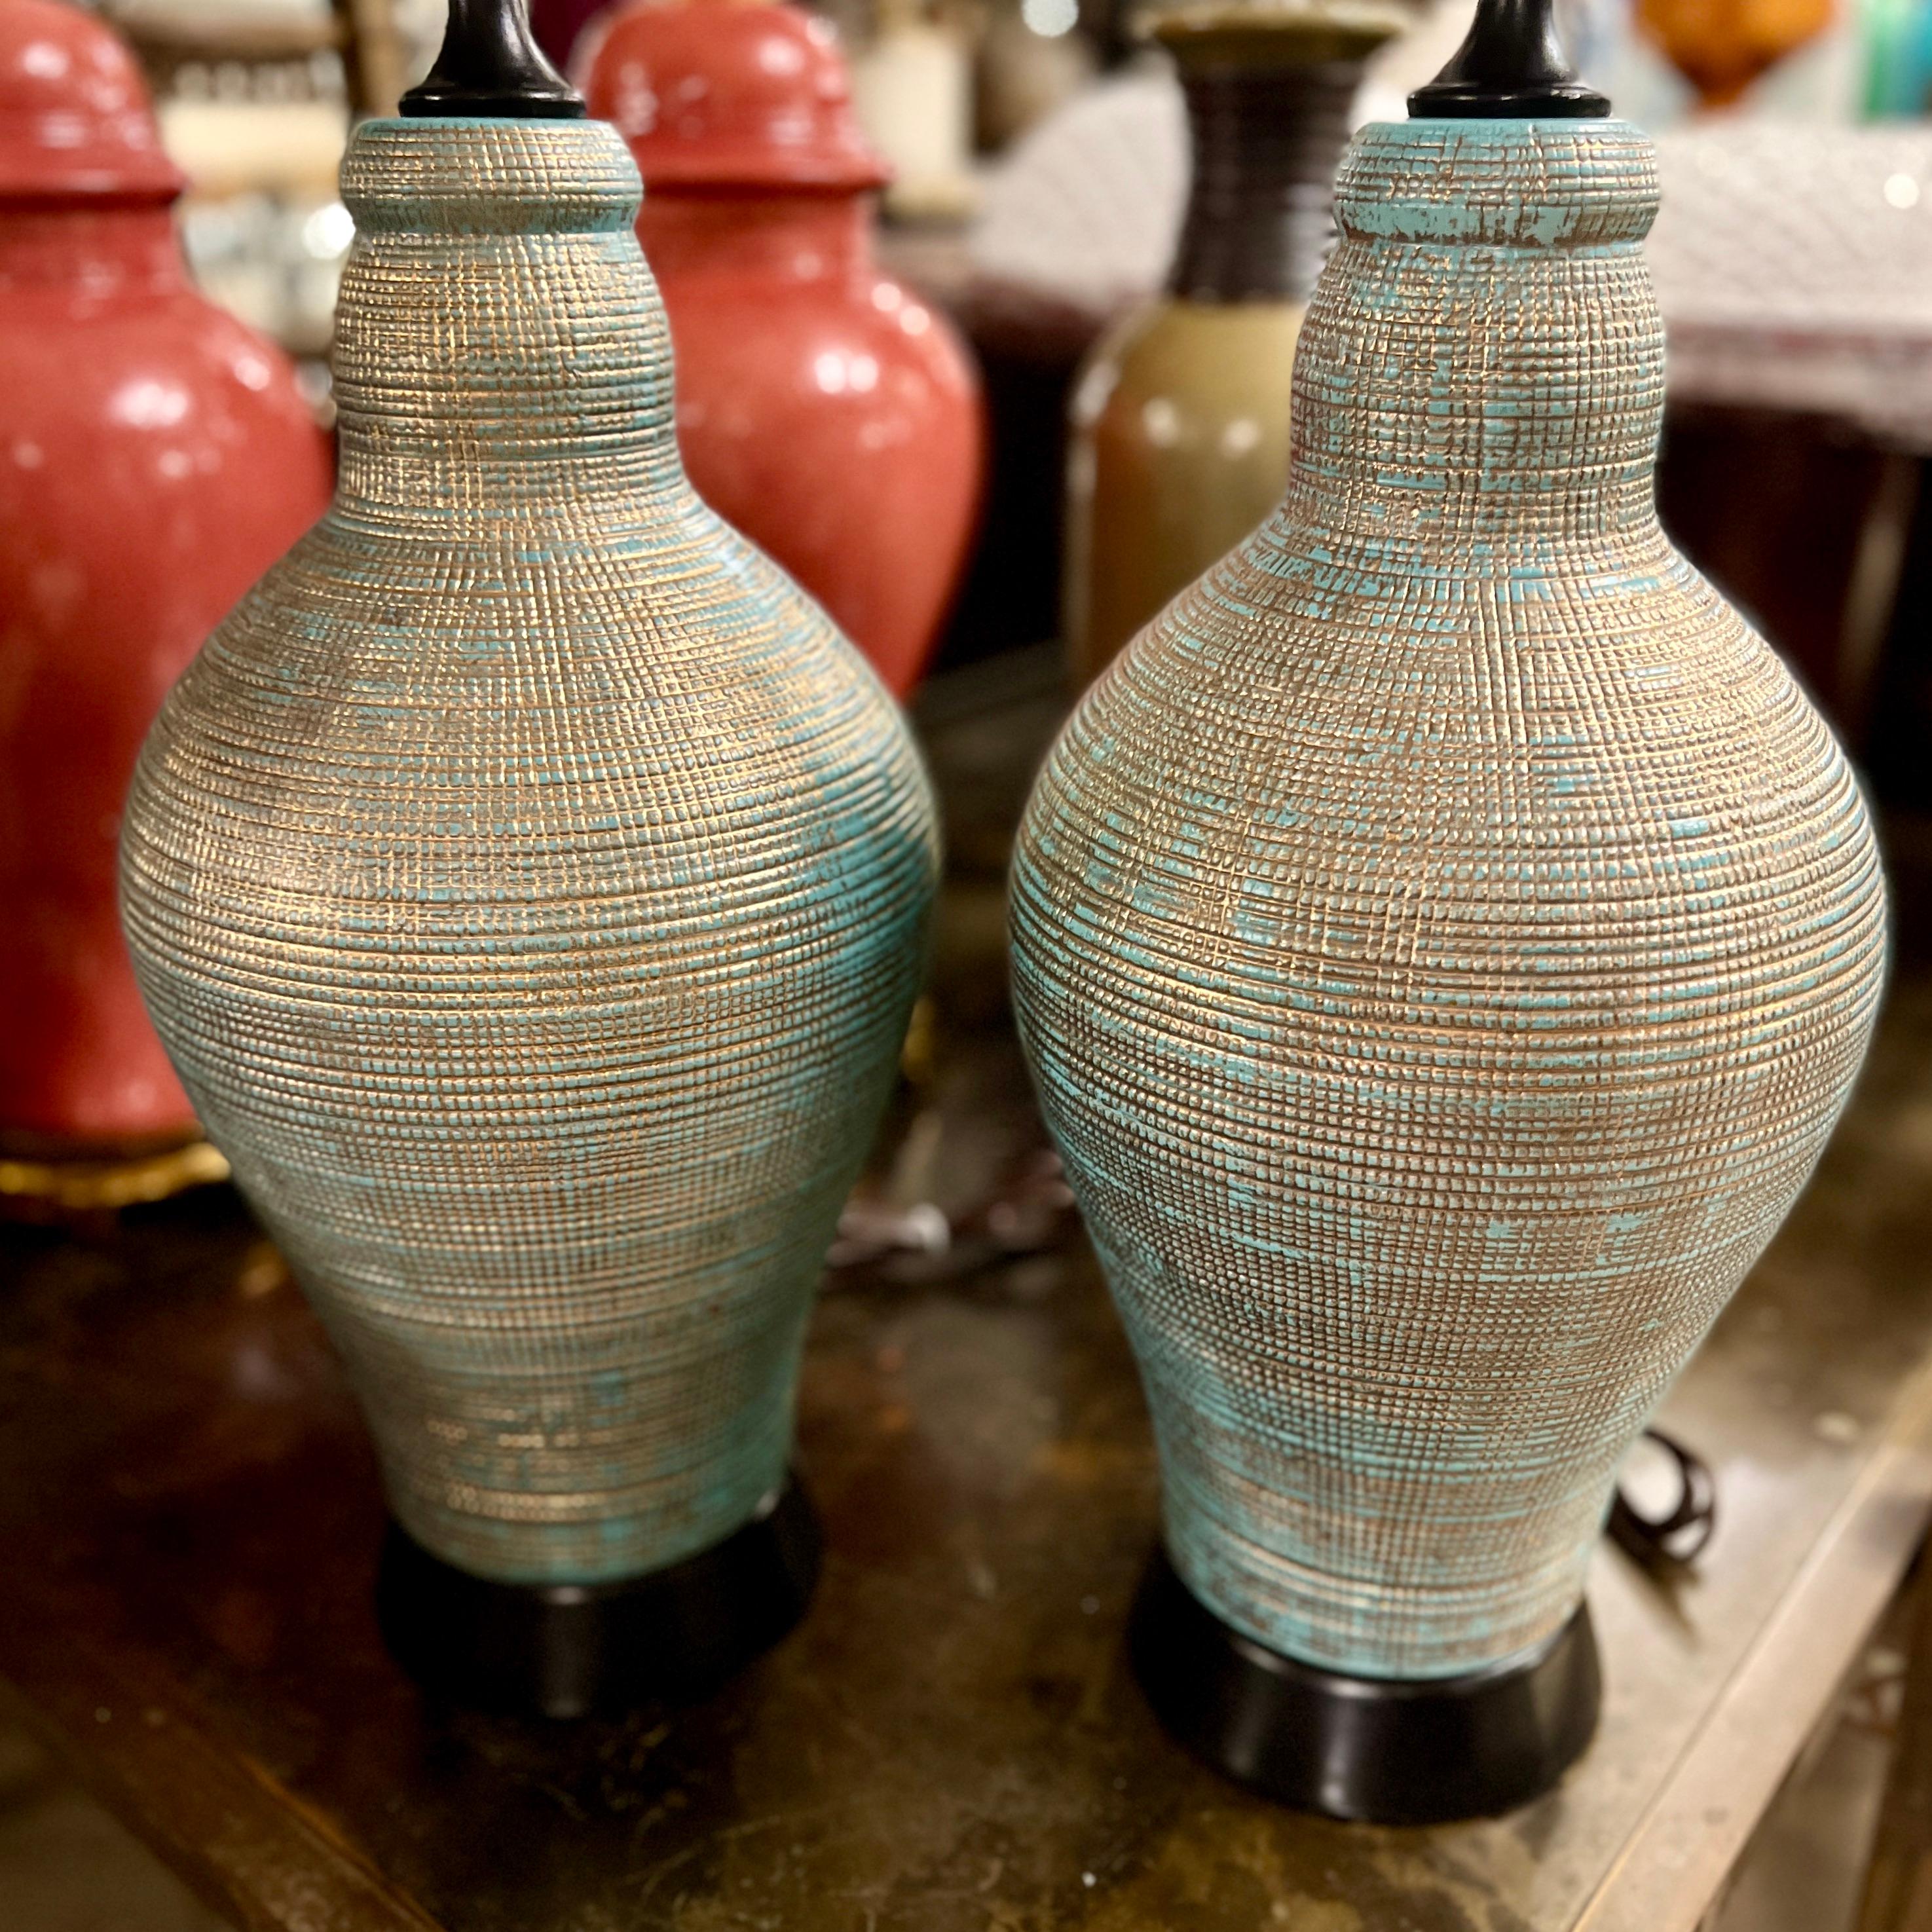 Pair of circa 1960's Danish turquoise and gold  textured porcelain table lamps with lacquered wood bases.

Measurements:
Height of body: 20